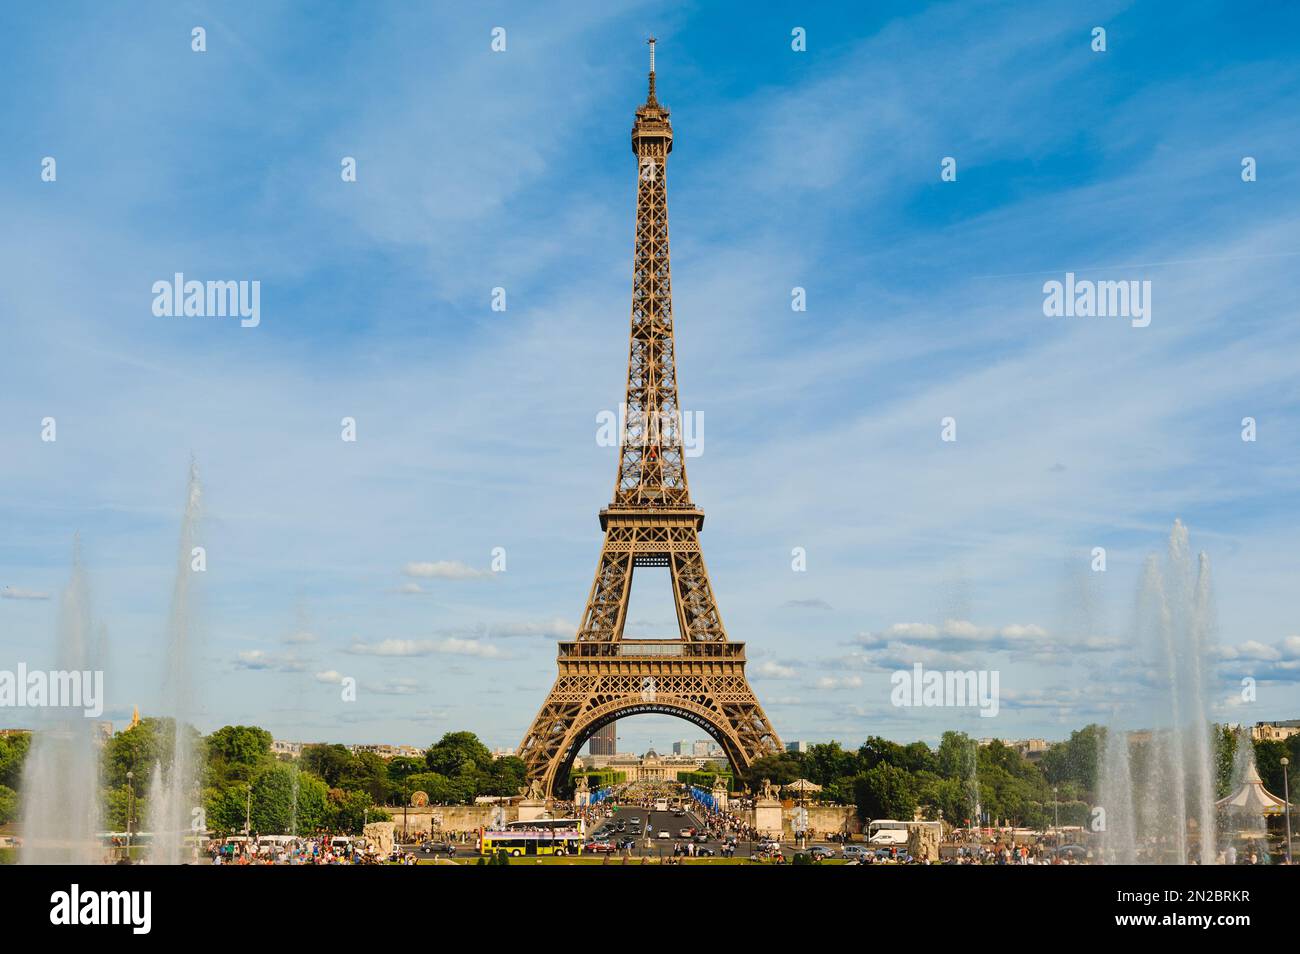 Eiffel Tower, the tallest structure in Paris, France Stock Photo